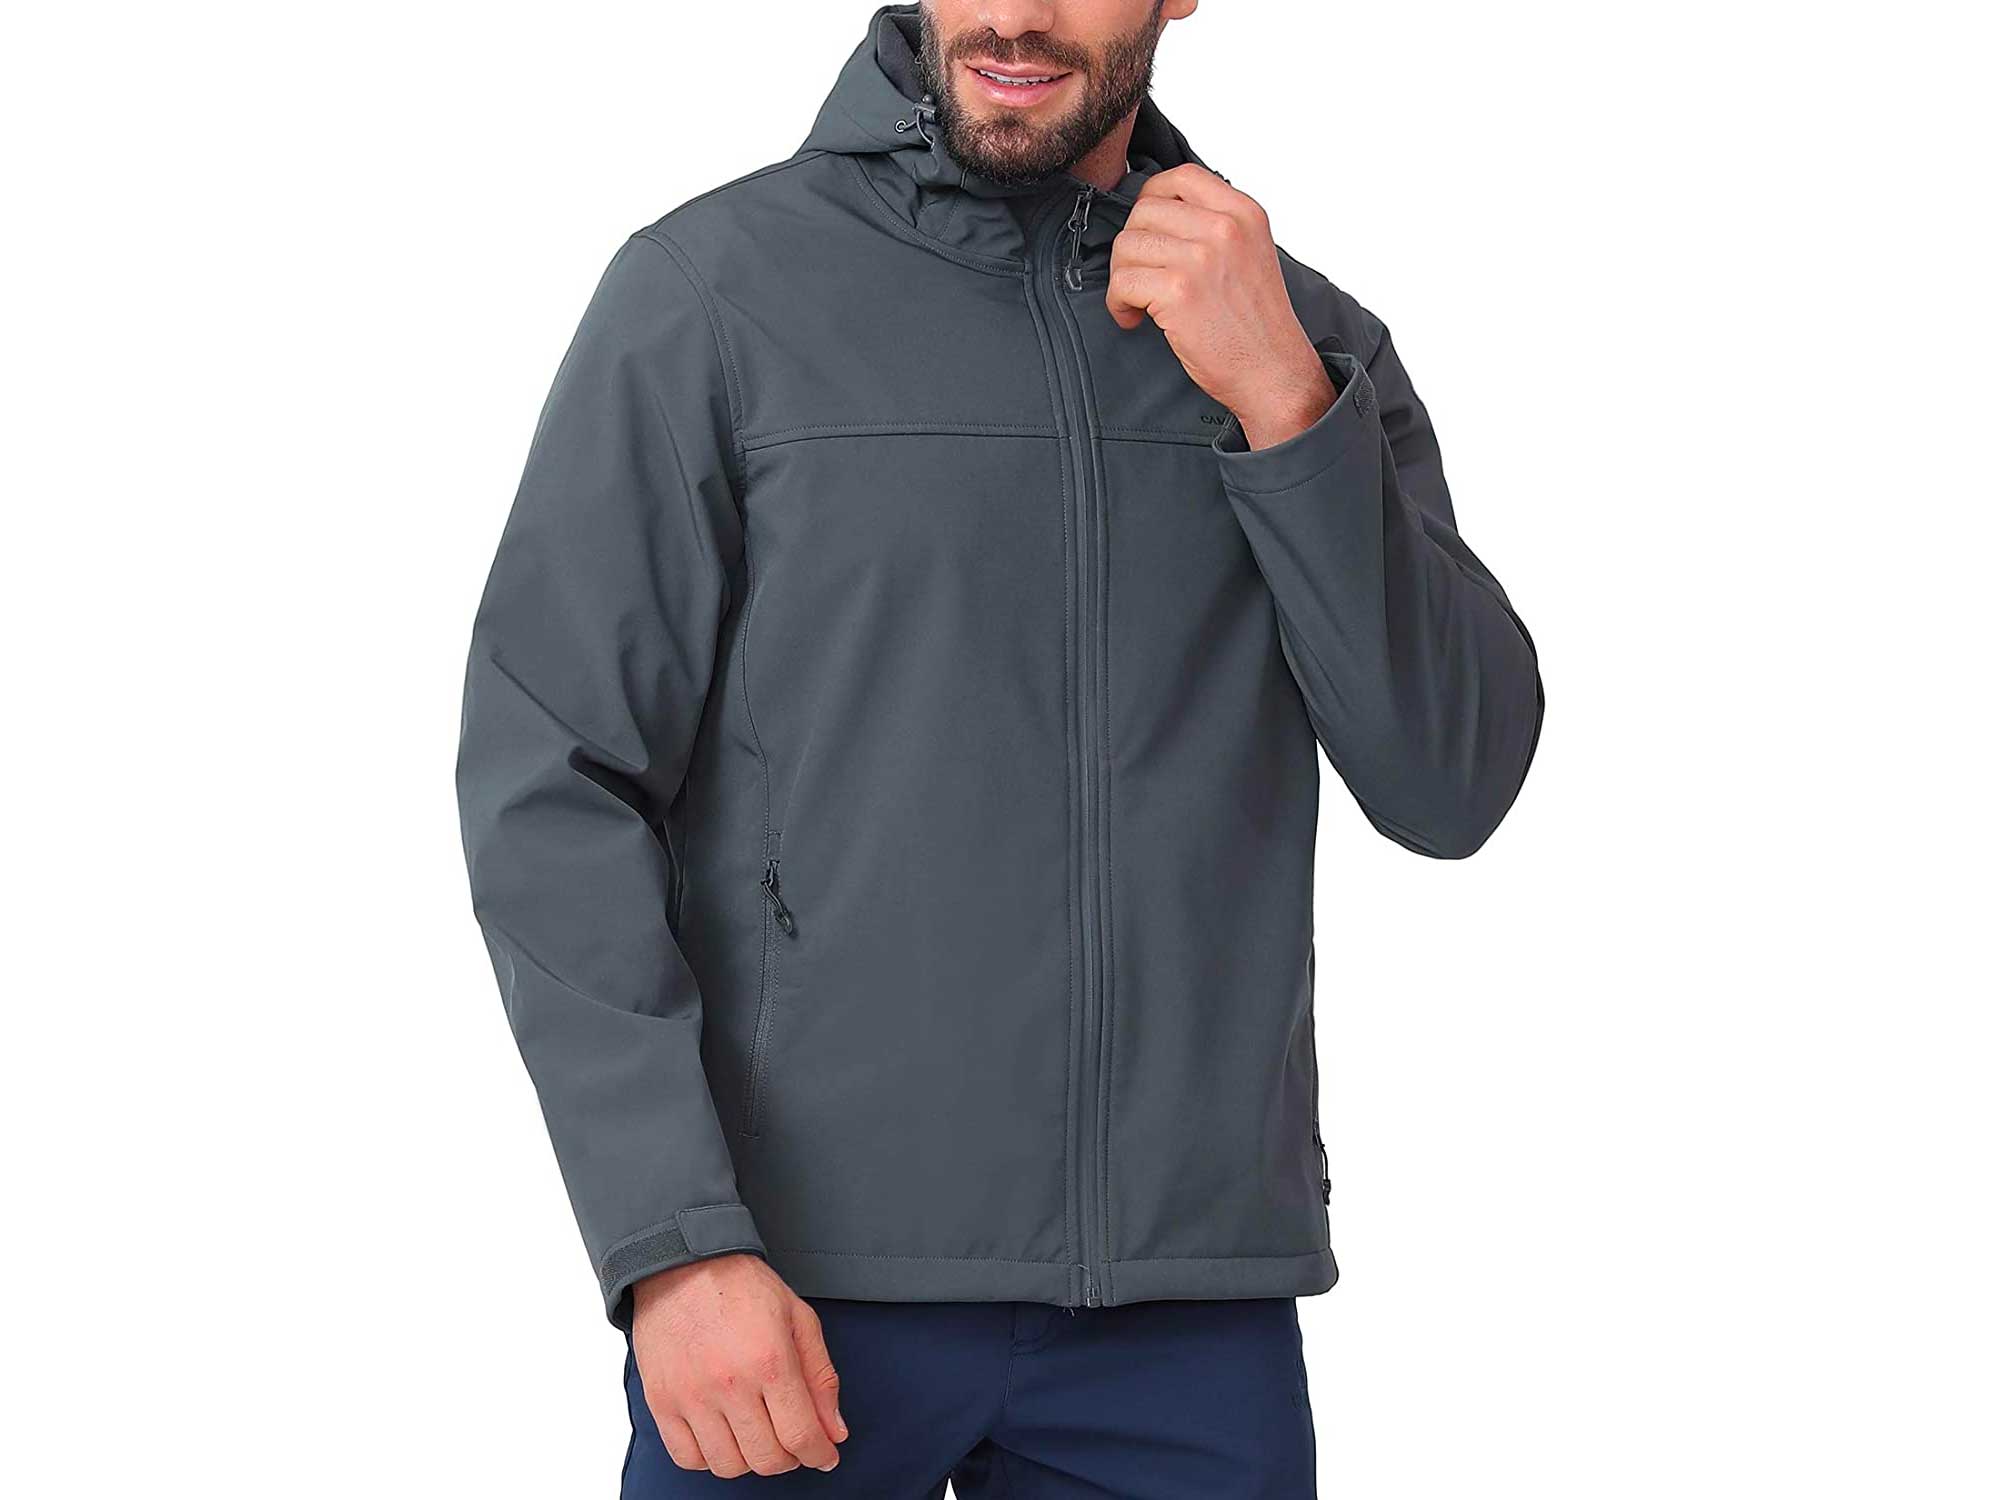 CAMEL CROWN Softshell Jacket Men Hooded Fleece Lined Outdoor Jackets Windproof Water Resistant for Hiking Casual Work